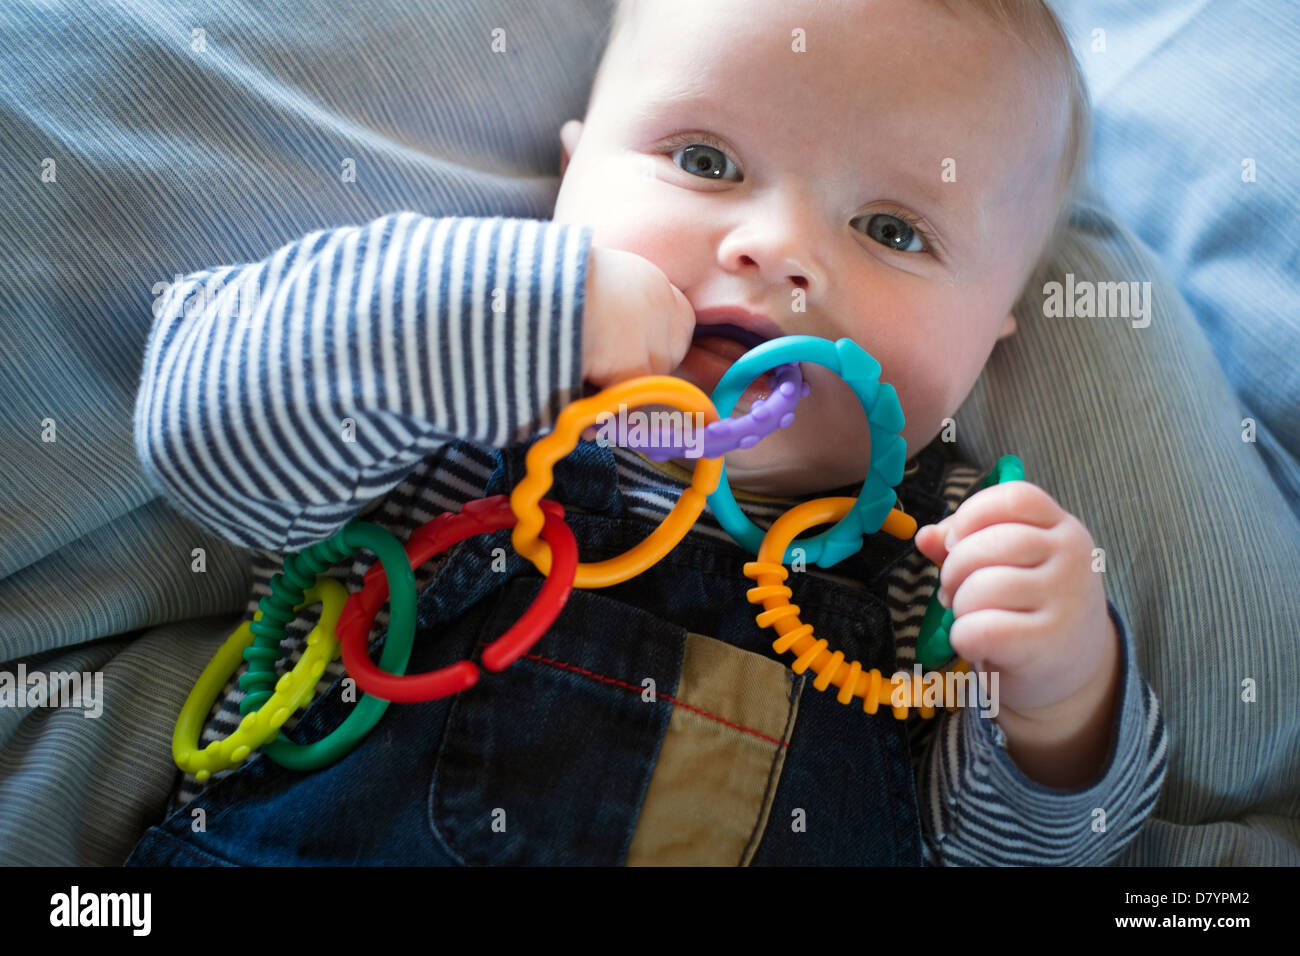 A baby boy playing with teething rings. Stock Photo